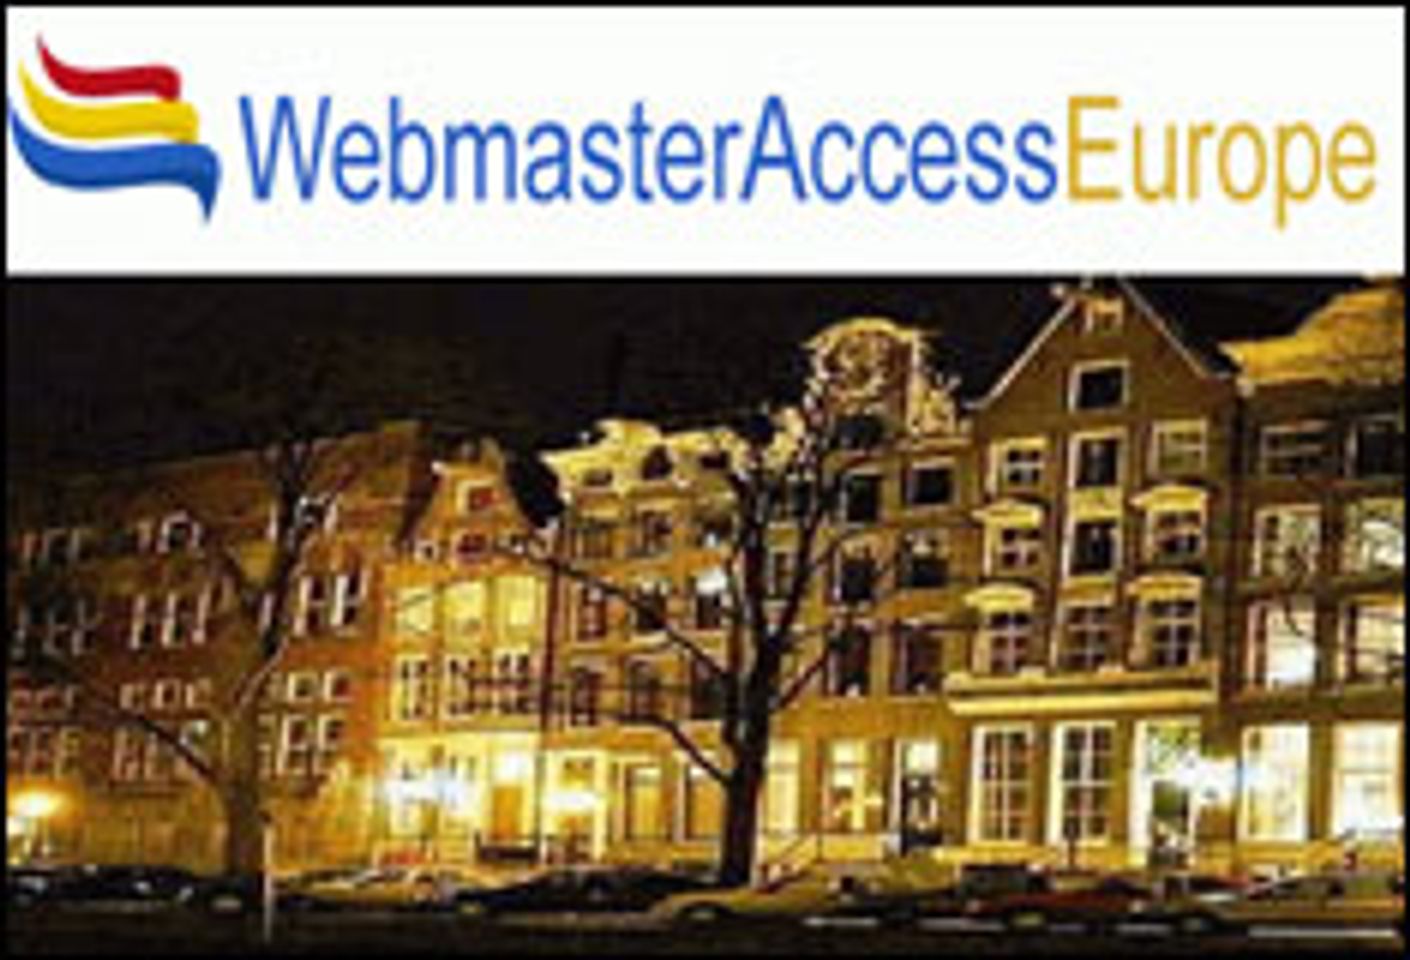 Webmaster Access Europe Registration Closes Today